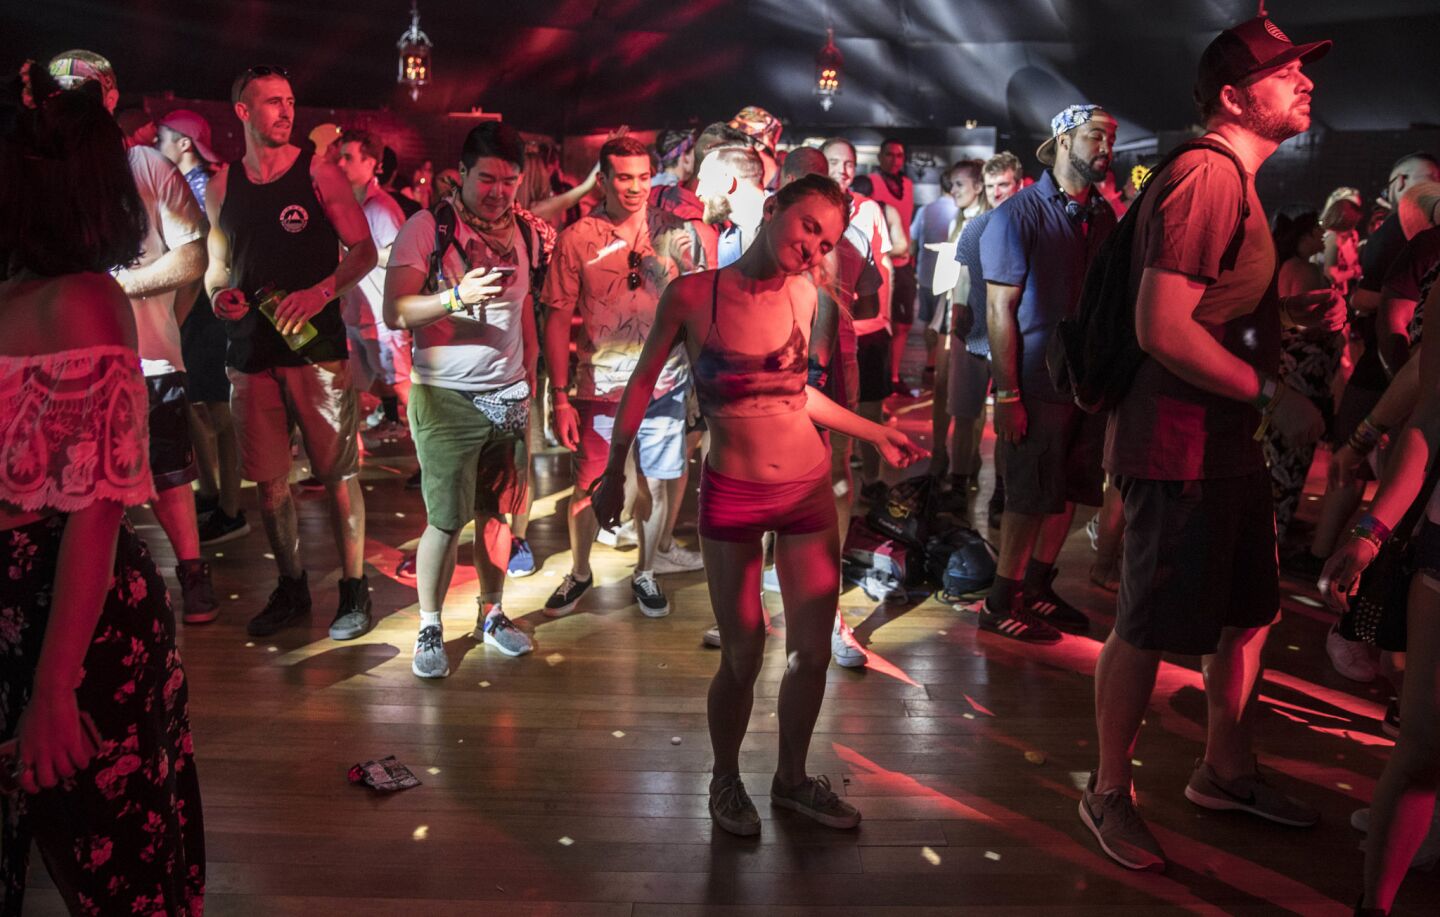 INDIO, CALIF. -- FRIDAY, APRIL 14, 2017: Coachell goers dance inside the Yuma tent at the Coachella Music and Arts Festival in Indio, Calif., on April 14, 2017. (Brian van der Brug / Los Angeles Times)